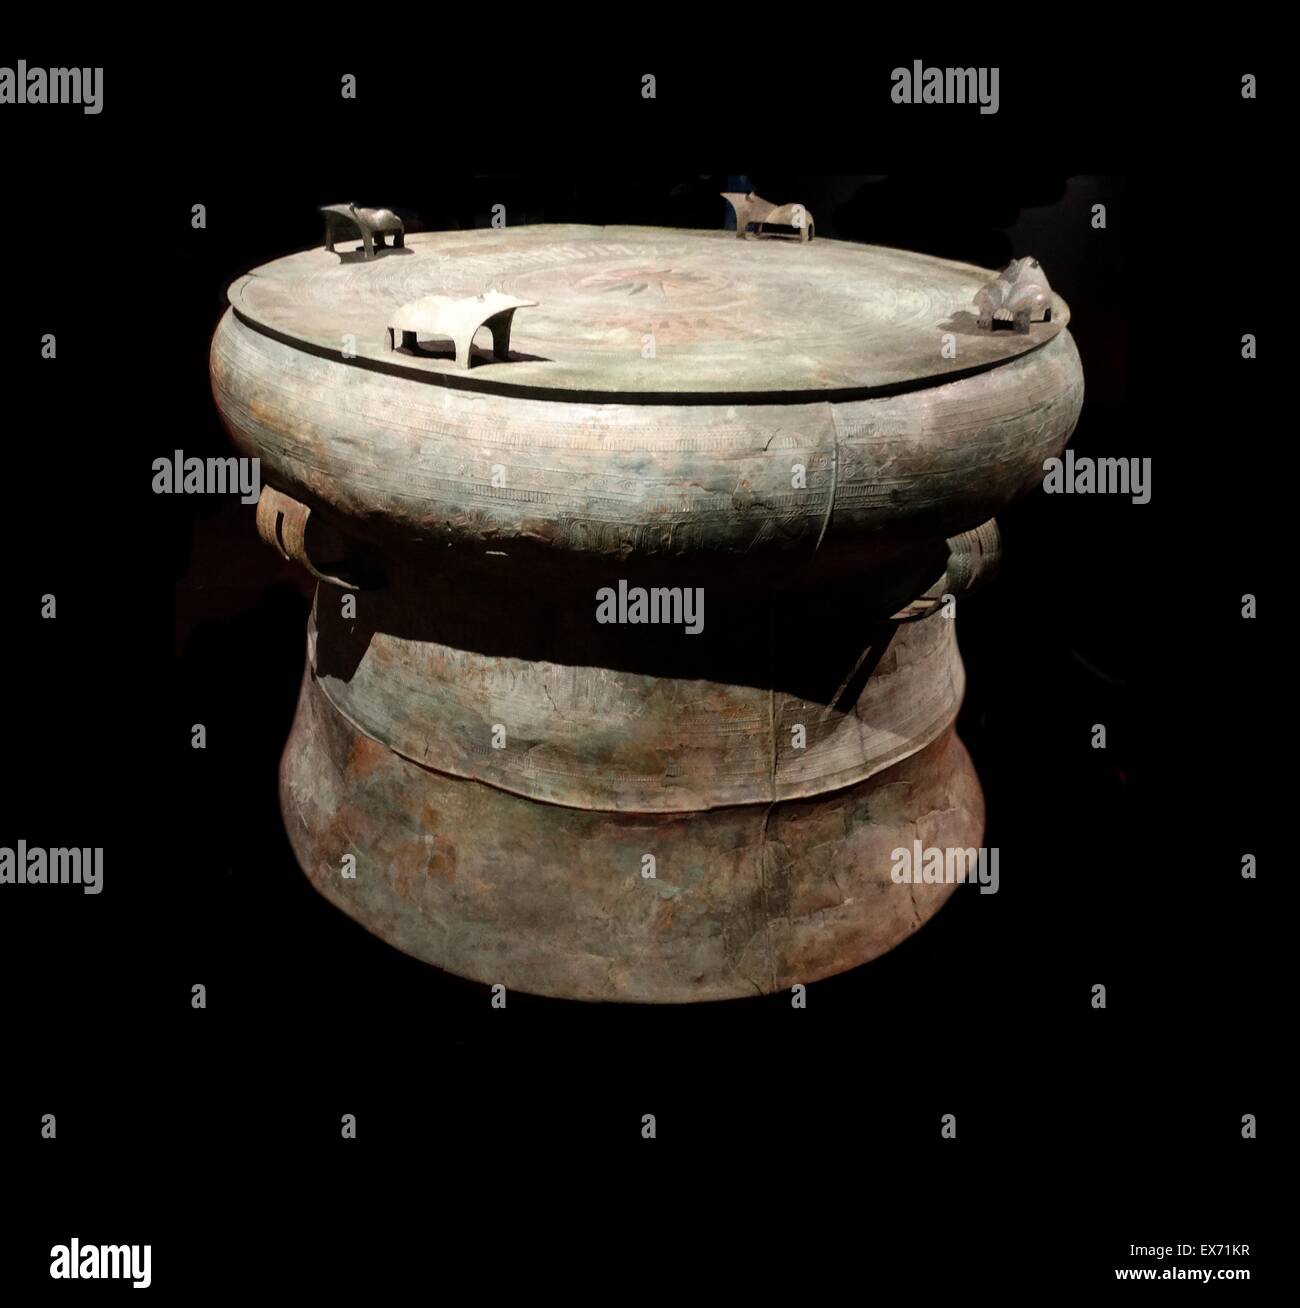 Javanese bronze drum 4th century BC -2nd century AD. Although found in Indonesia this form of musical instrument was common to South east Asia in particular Vietnam Stock Photo